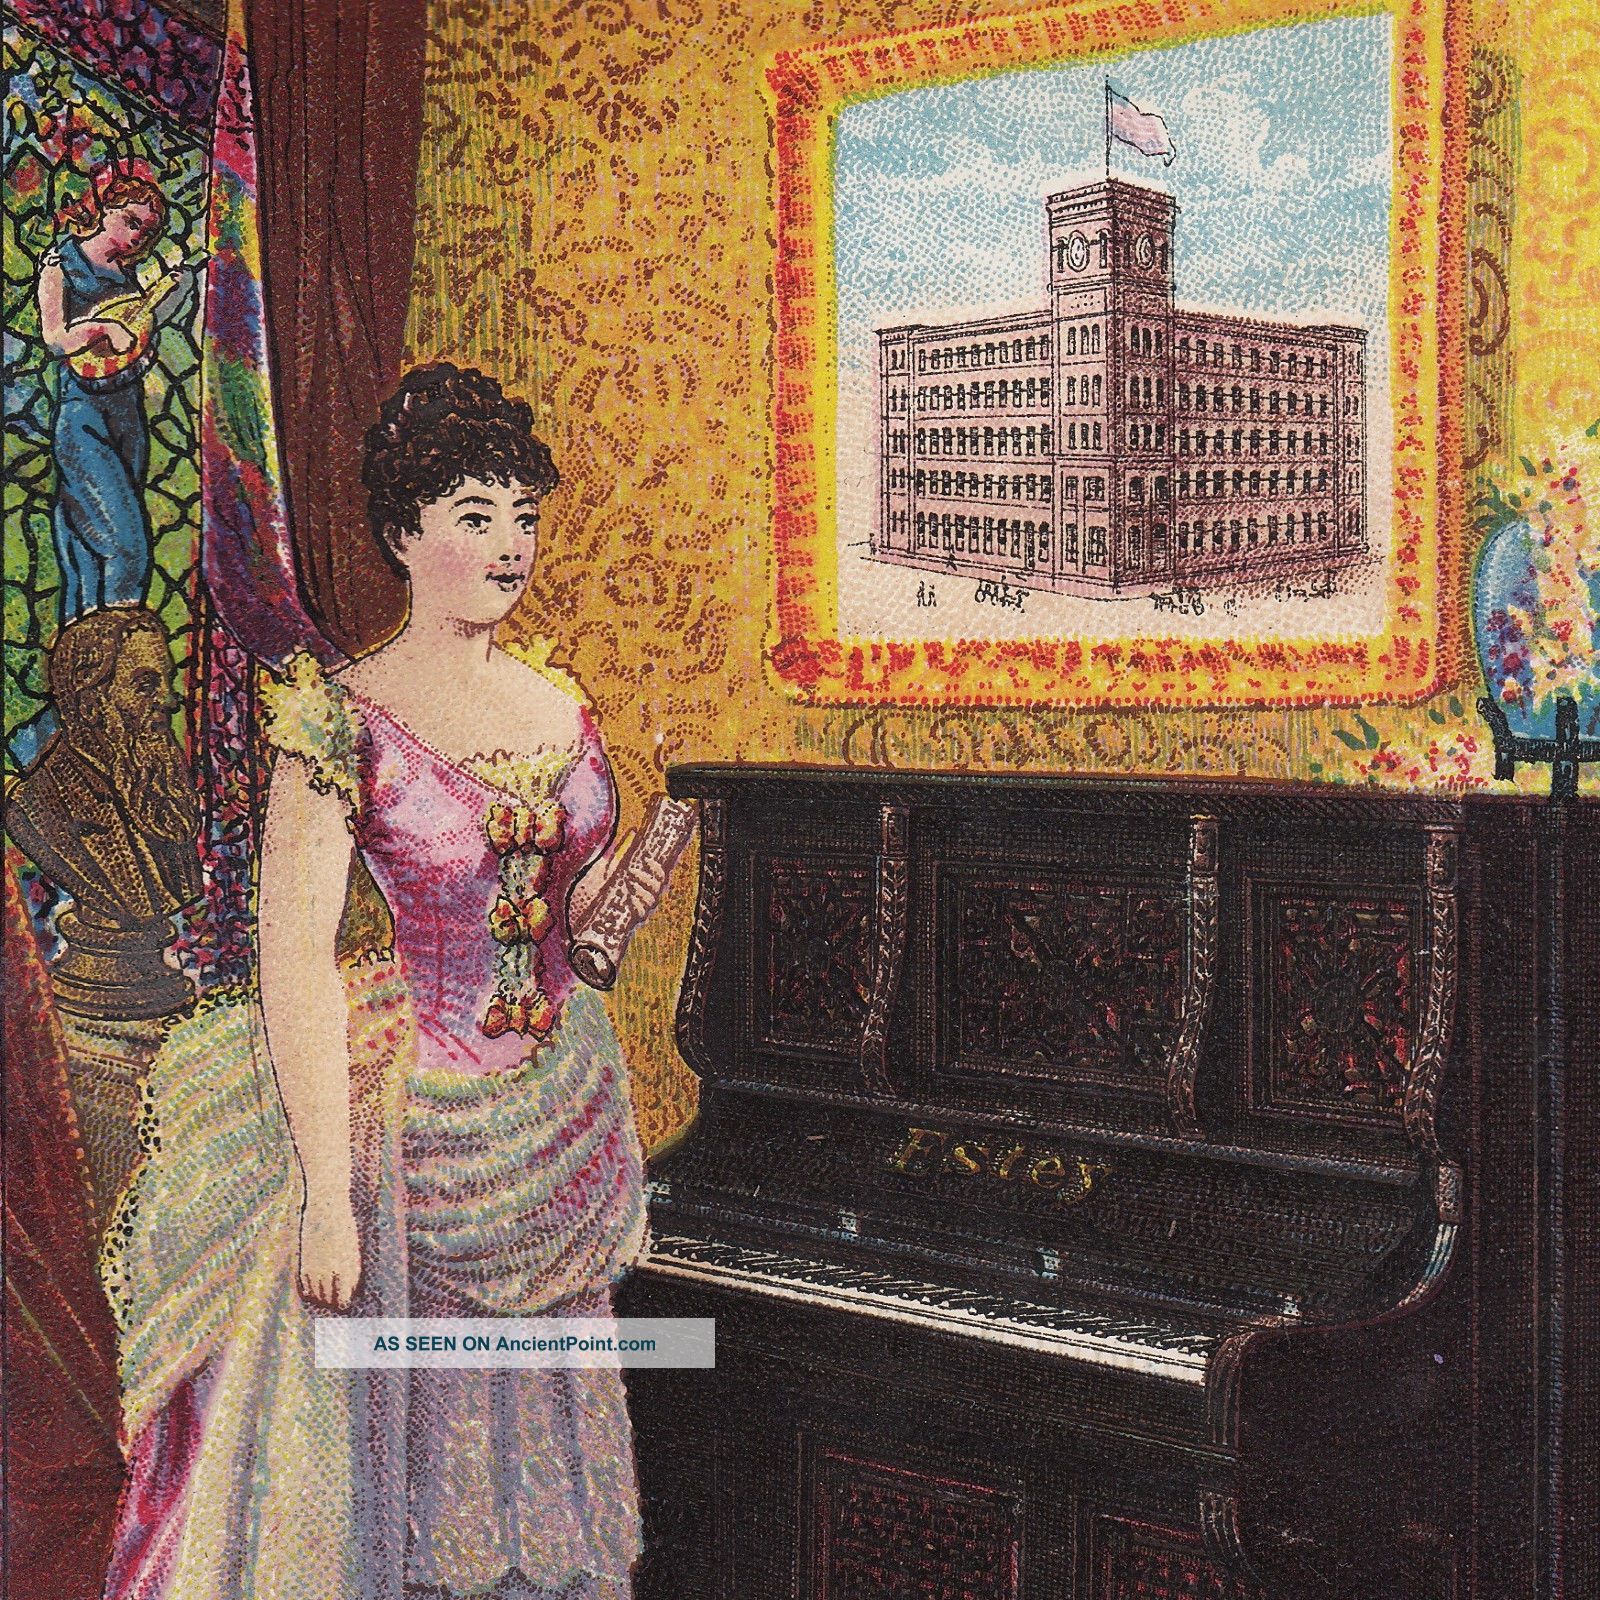 Estey Piano Co New York Ny Factory View Antique Victorian Advertising Trade Card Keyboard photo